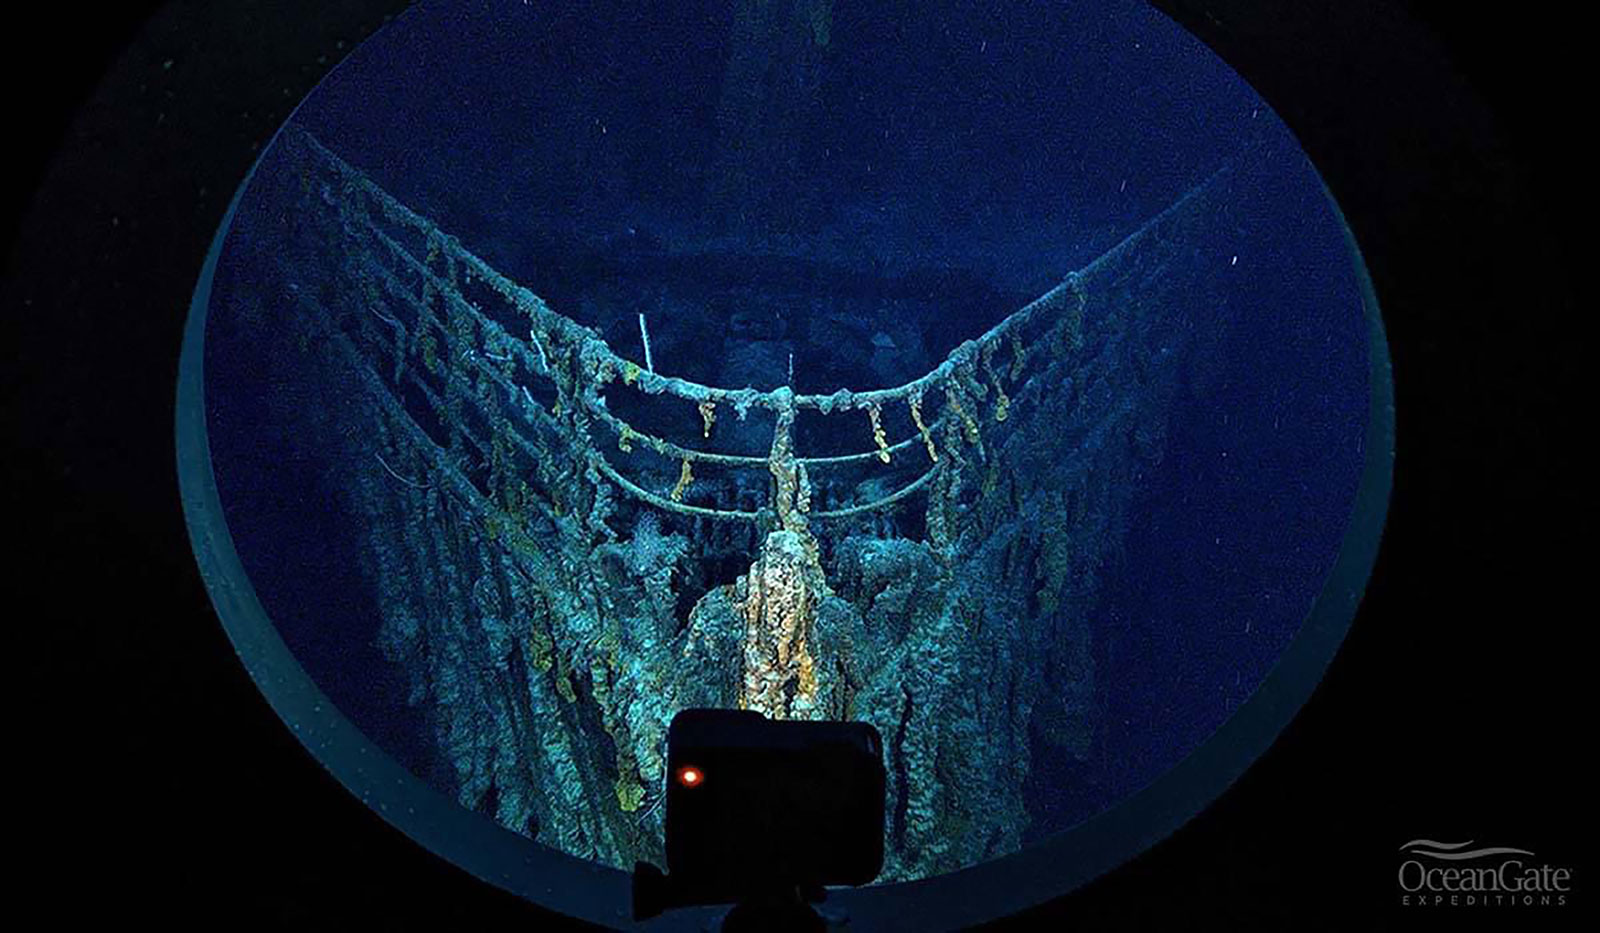 An undated file photo shows the Titanic shipwreck from a viewport of an OceanGate Expeditions submersible.